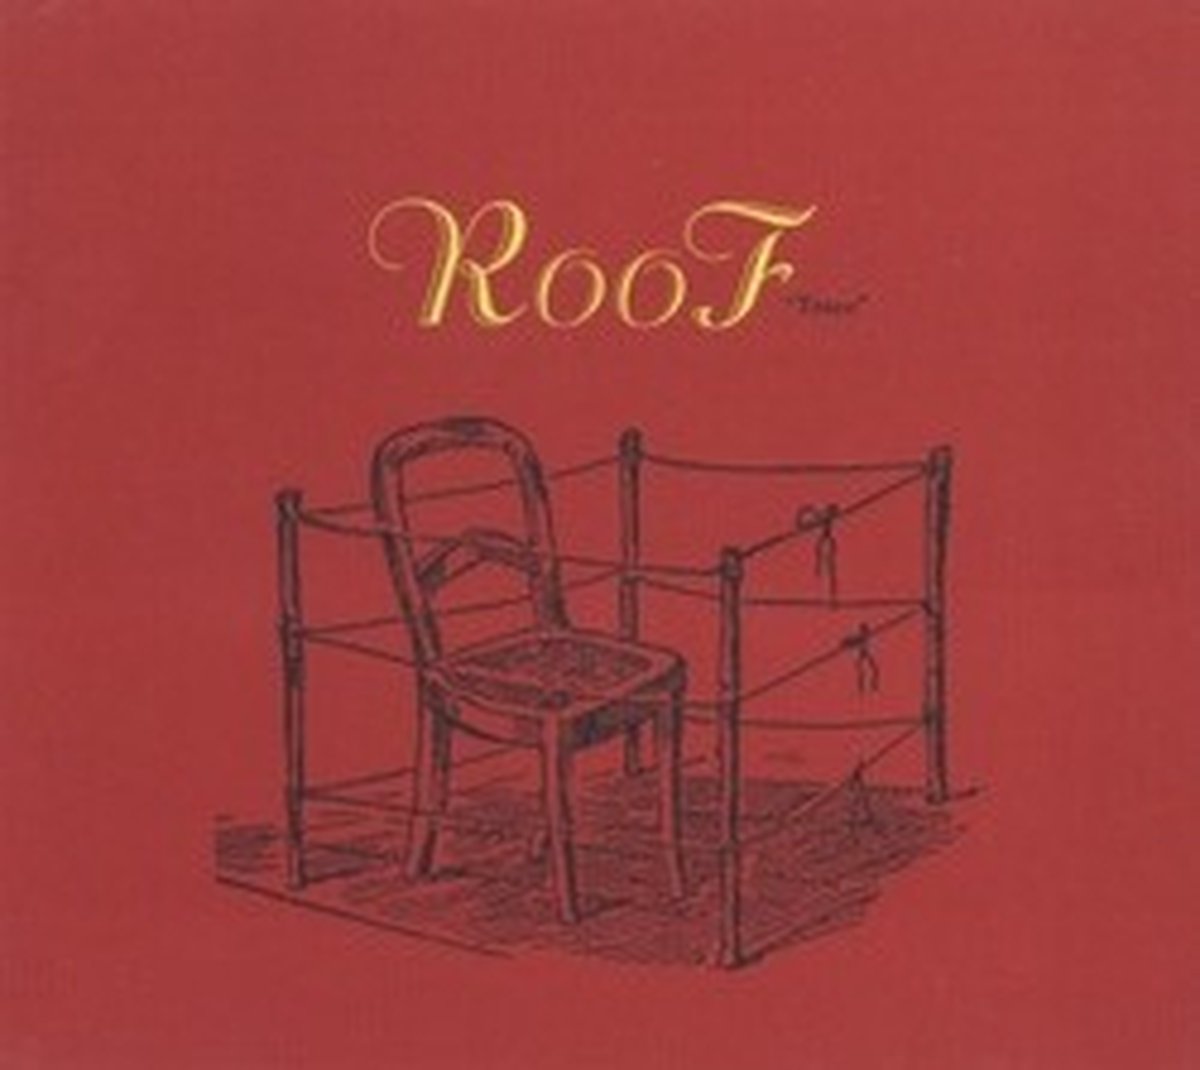 Roof - Trace (CD)